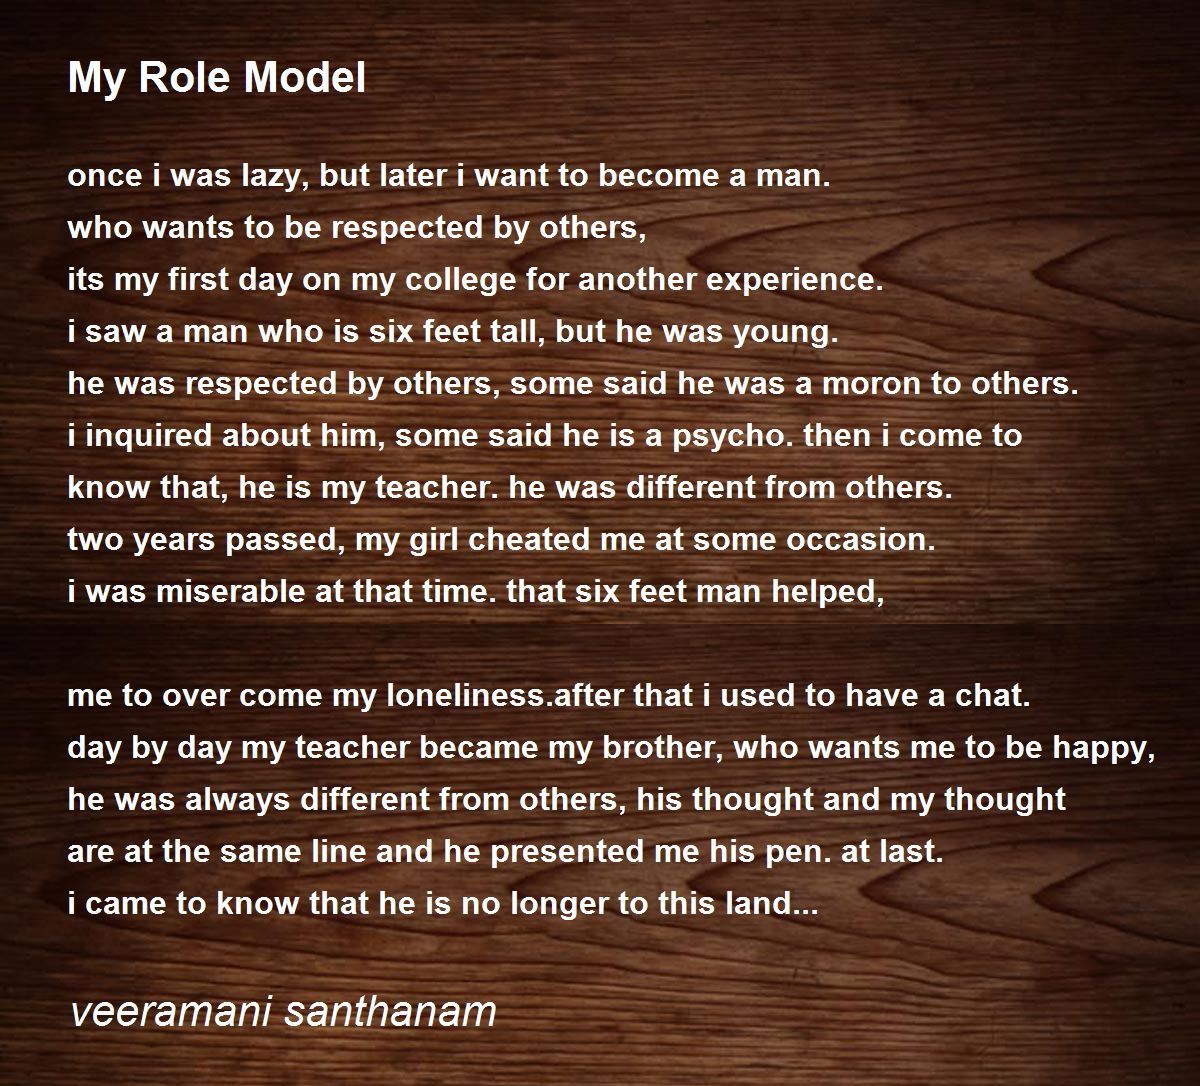 paragraph on my role model